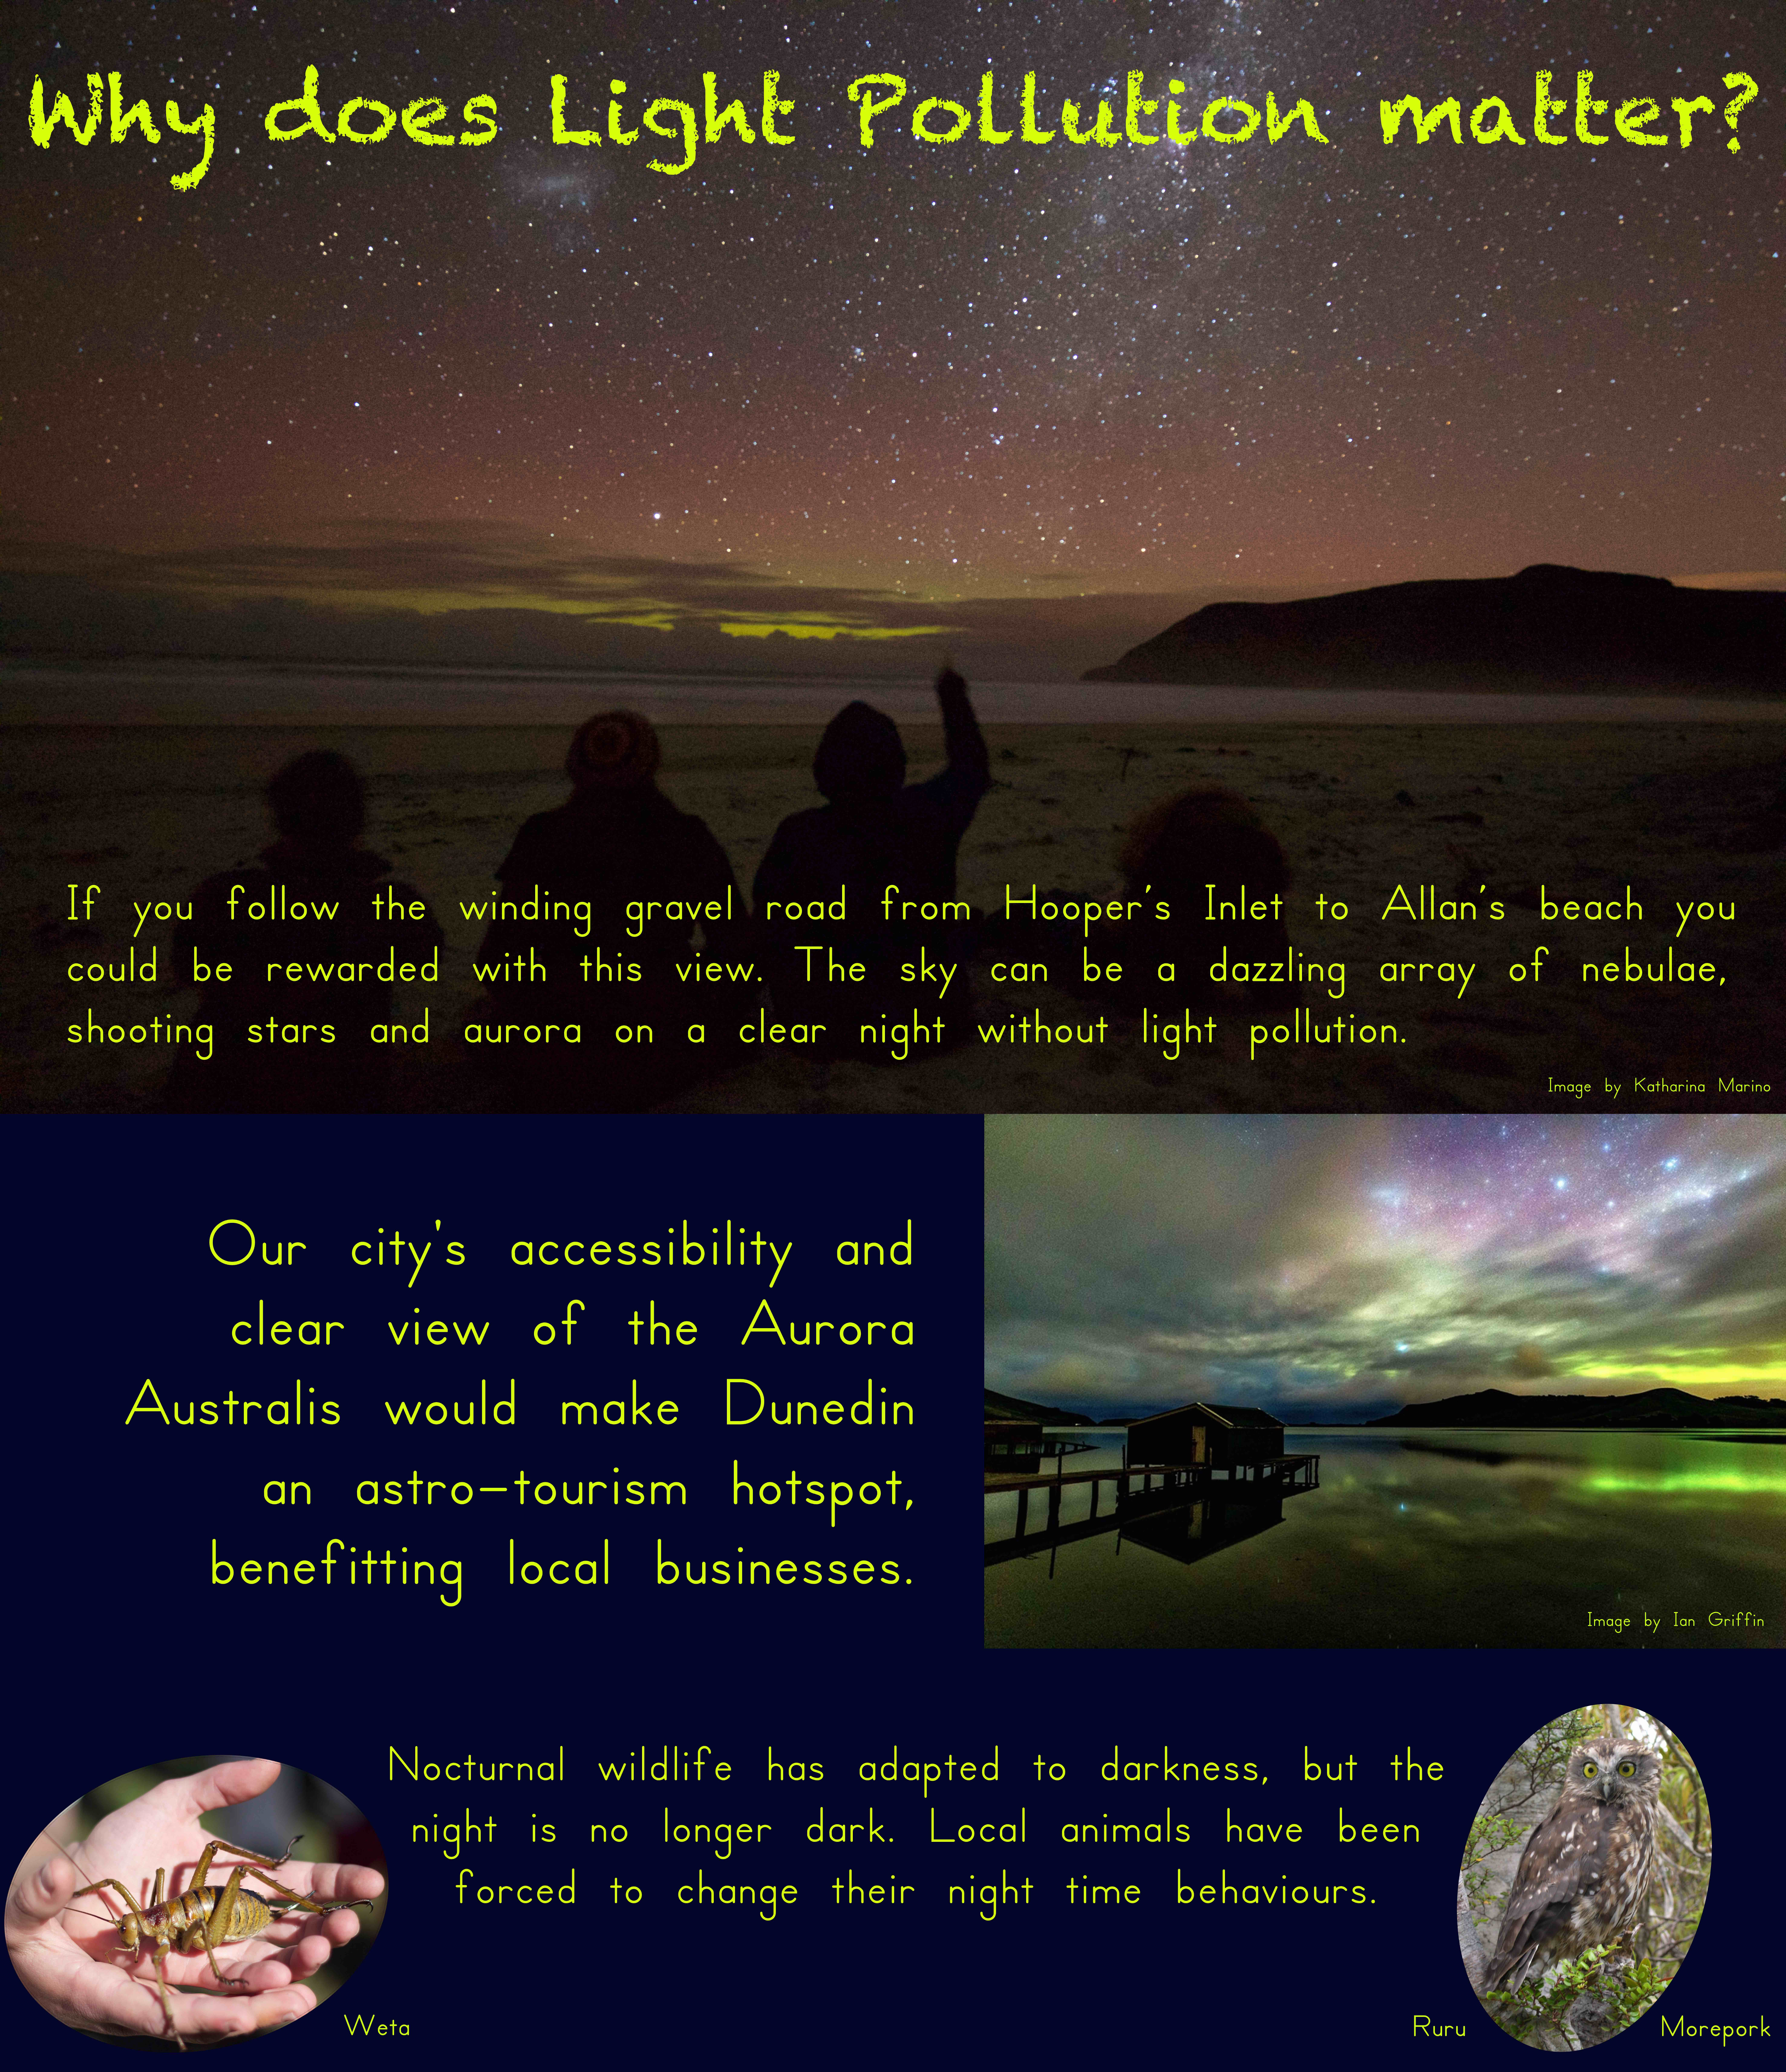 Why does light pollution matter